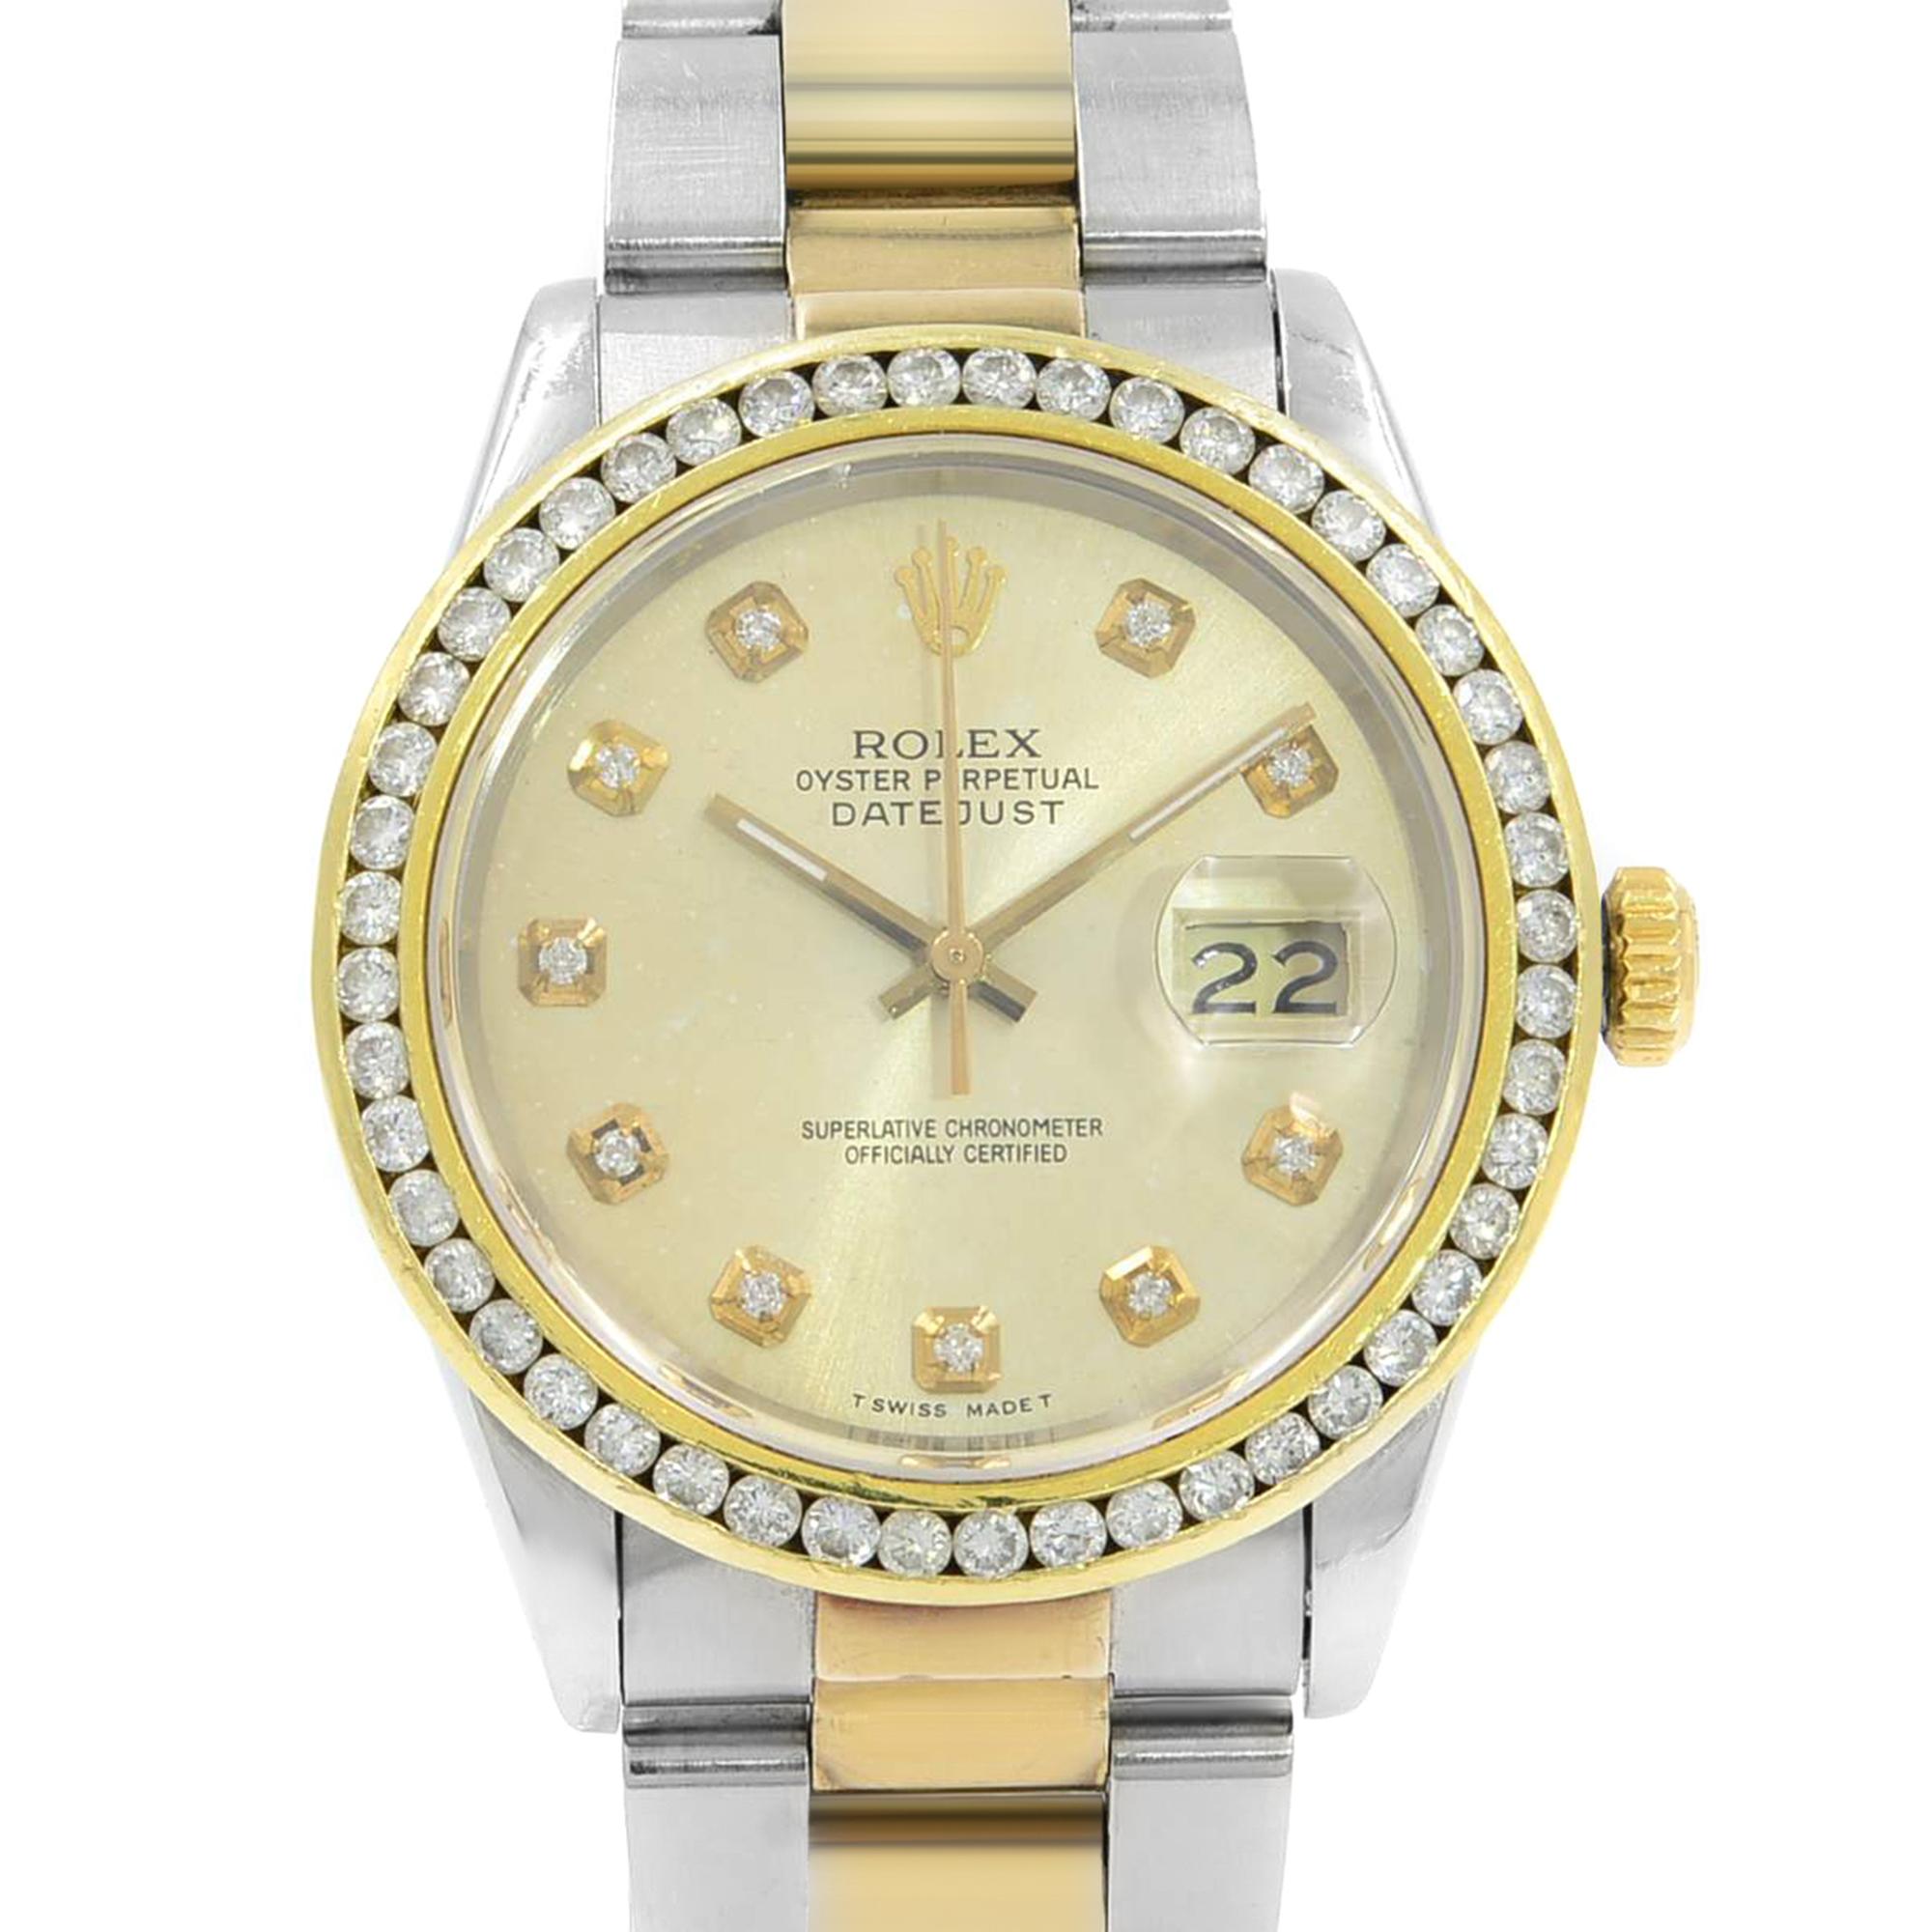 This pre-owned Rolex Datejust  16233  is a beautiful men's timepiece that is powered by an automatic movement which is cased in a stainless steel case. It has a round shape face, date dial and has hand diamonds style markers. It is completed with a